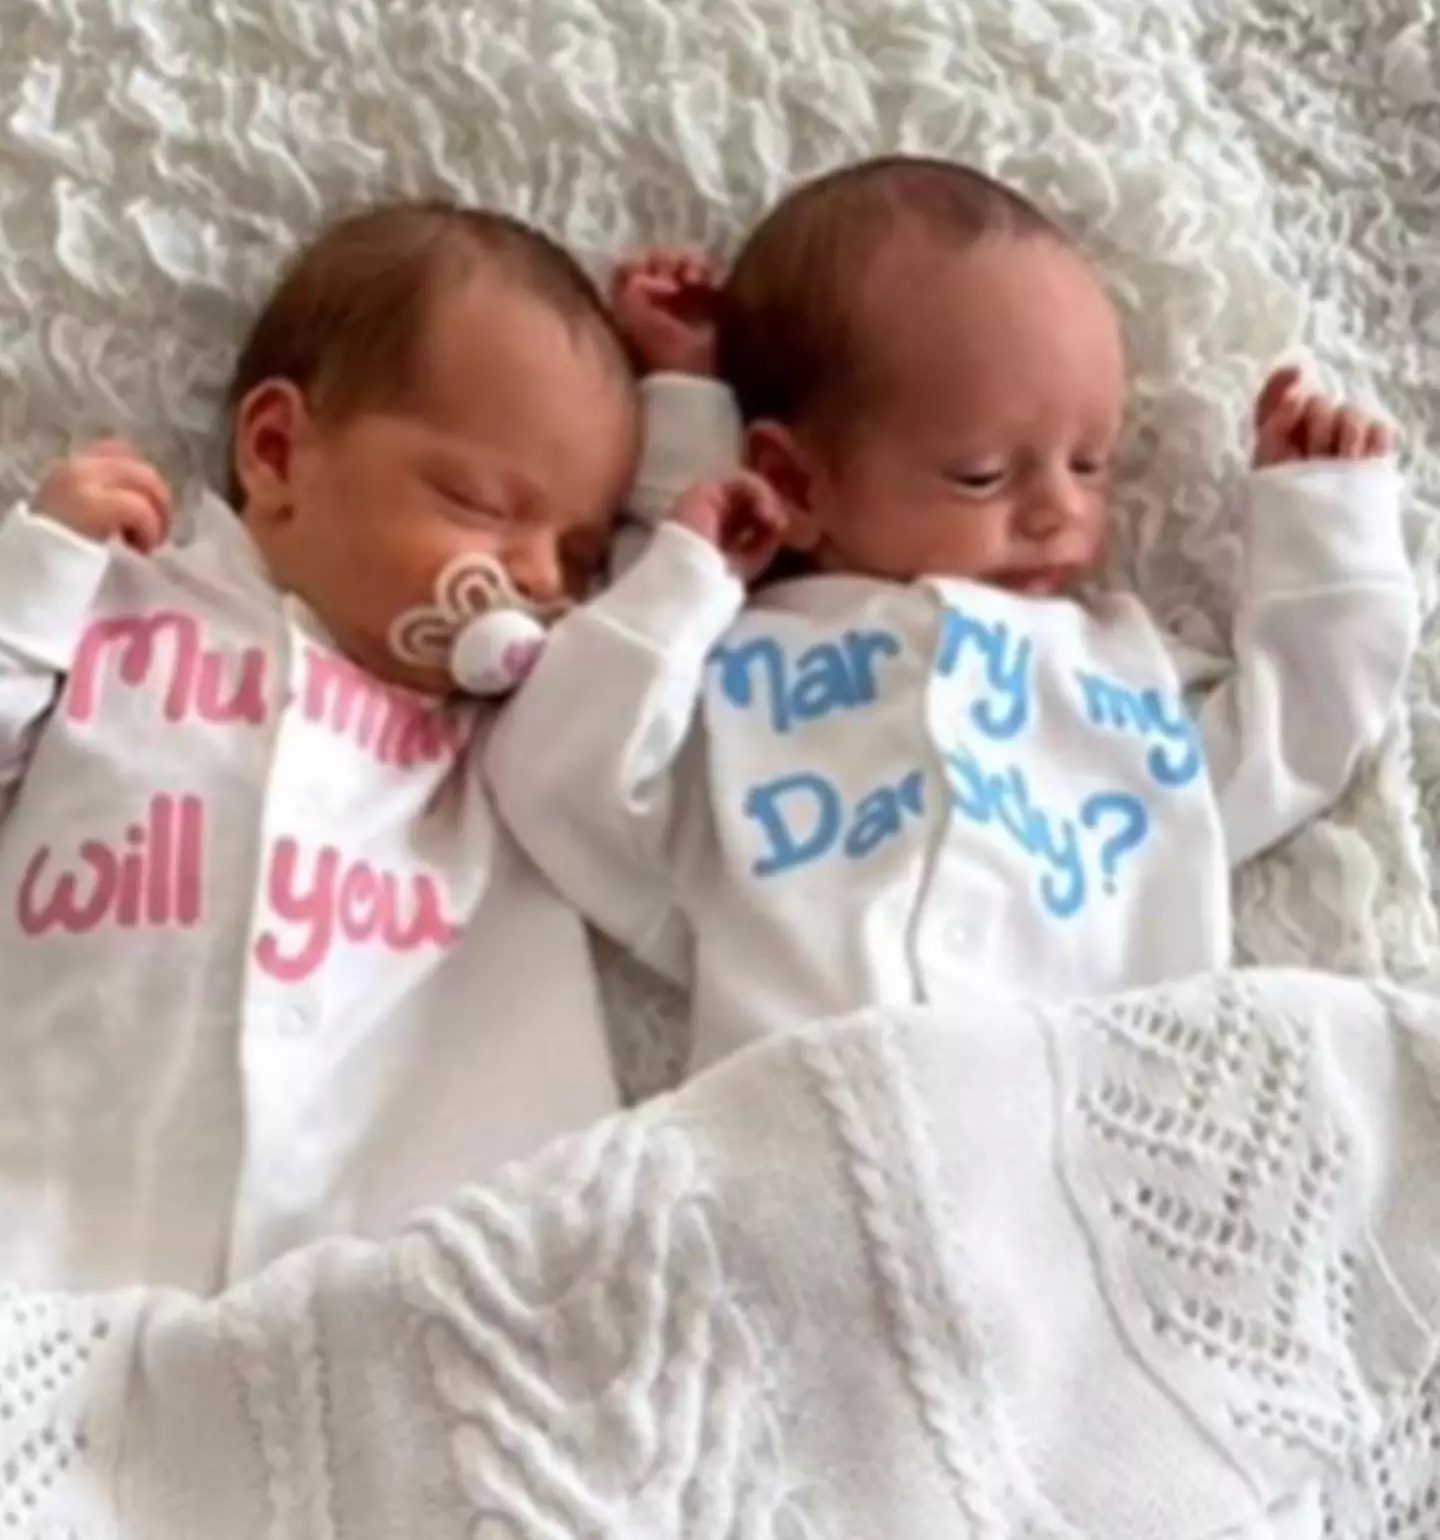 The adorable new twins were in the video.